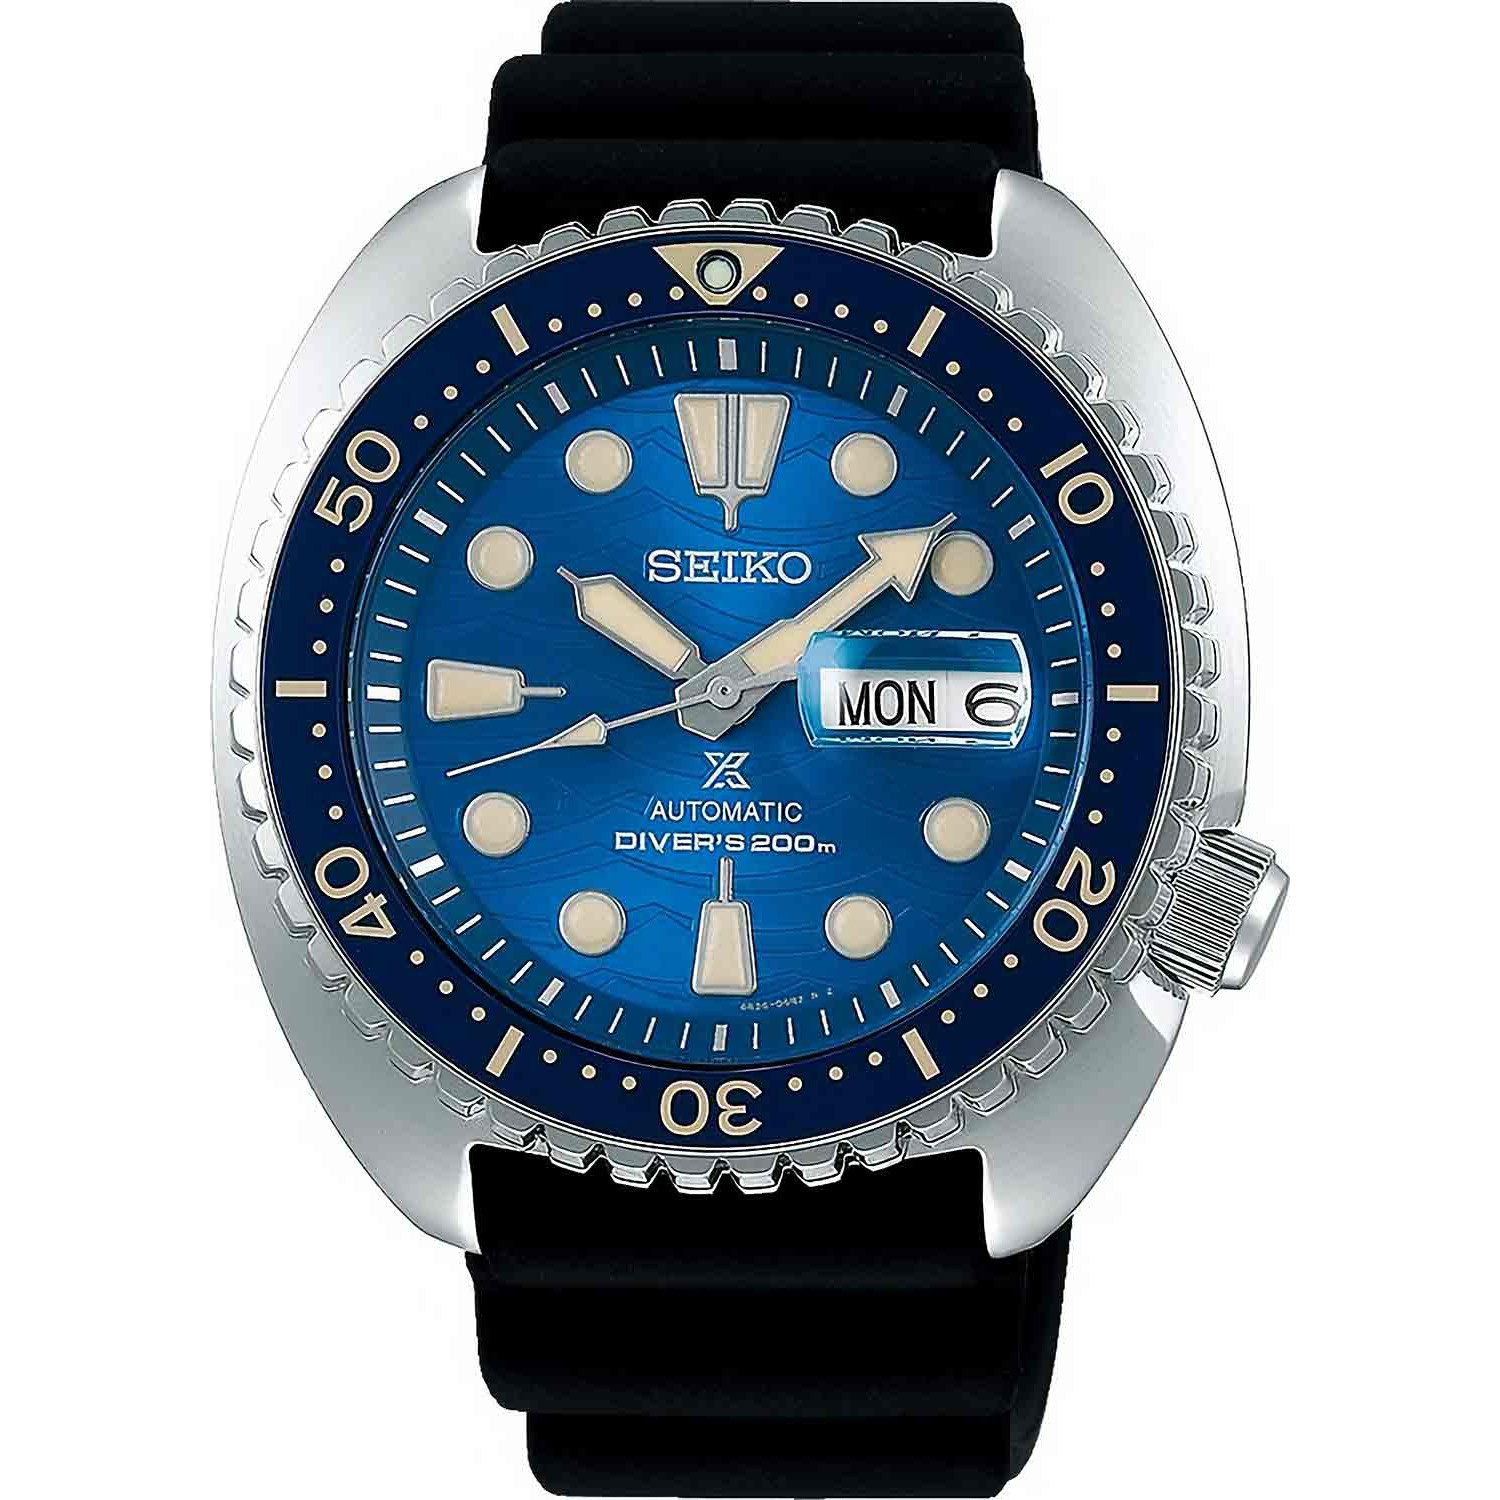 SRPE07K SEIKO Prospex King Turtle Blue Special Edition. The Seiko SRPE07K Automatic Prospex 200m Divers Watch Blue King Turtle. This mens watch features a stainless steel case, with a screw lock crown and a screw case back. The Seiko SRPE07K1 features a b